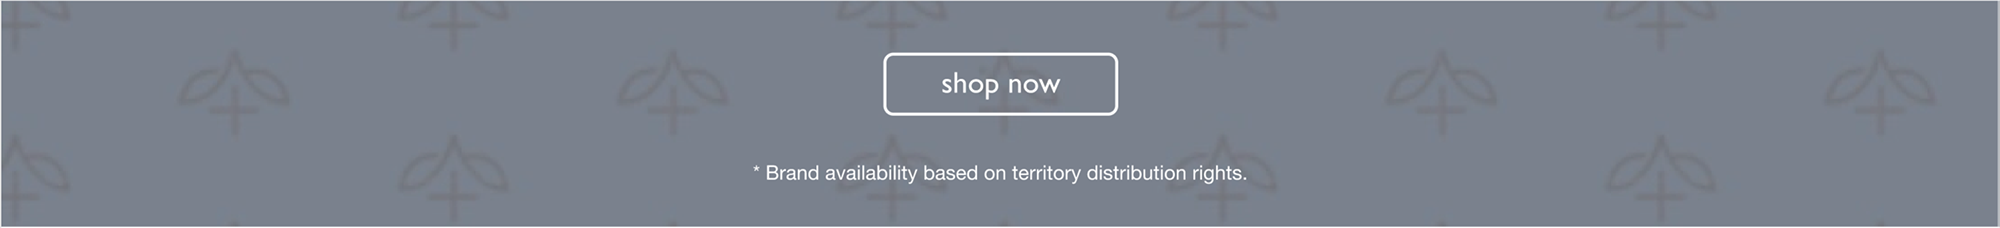 SHOP NOW | Brand availability based on territory distribution rights